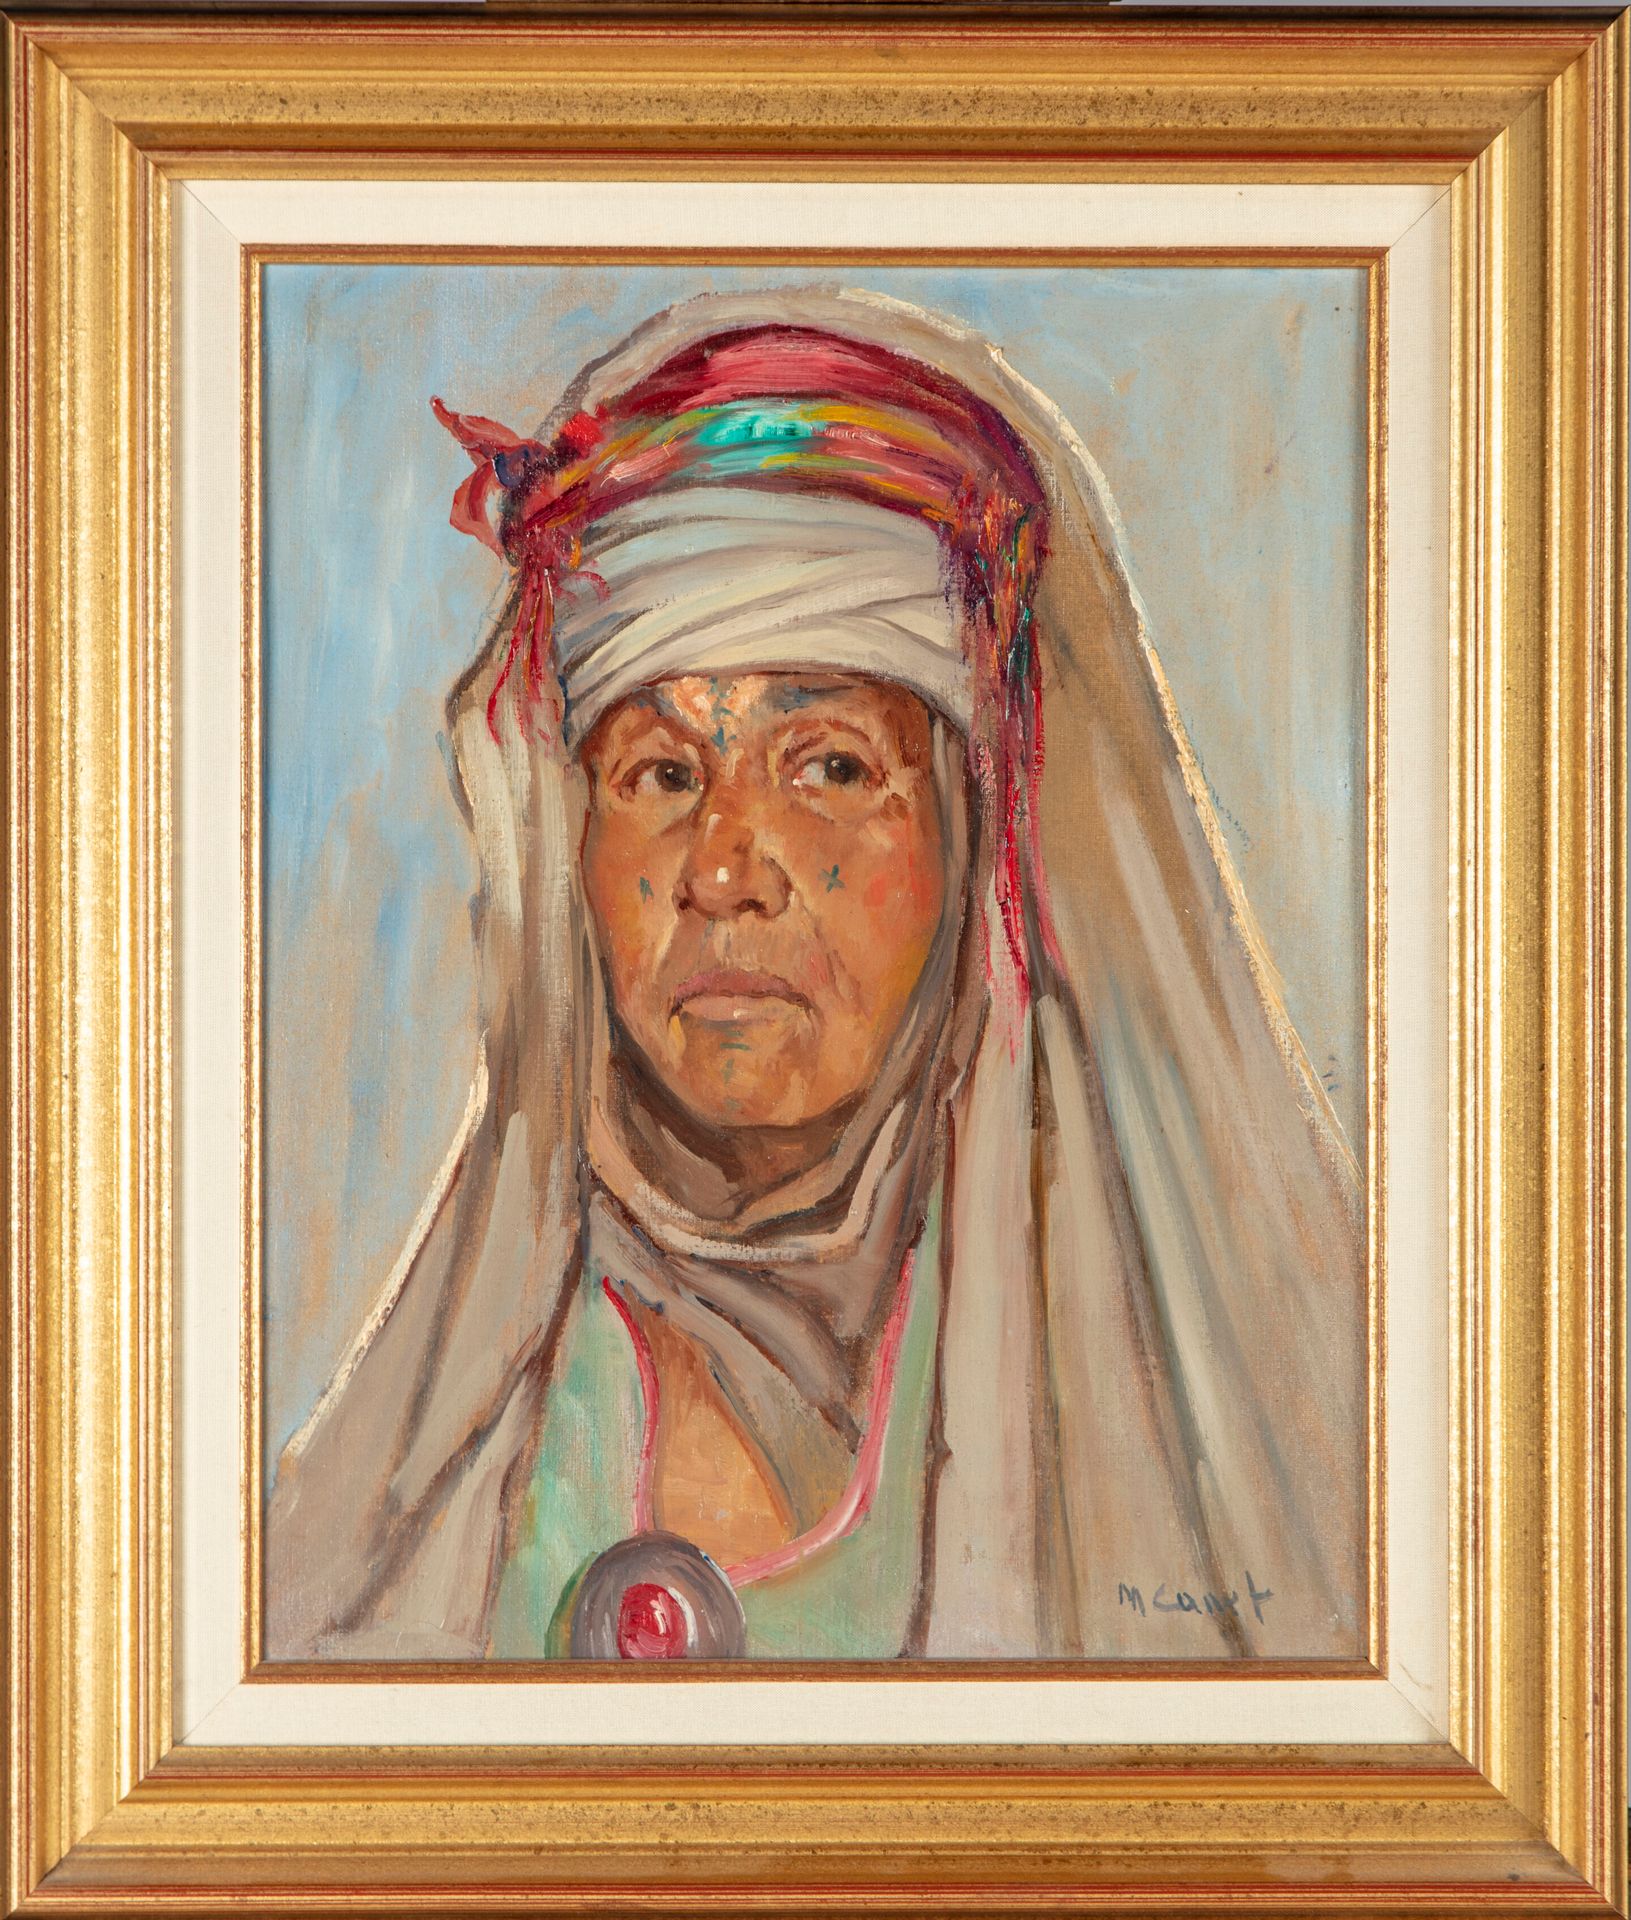 Null Marcel CANET (1875-1959)

Portrait of a Berber Woman

Oil on canvas mounted&hellip;